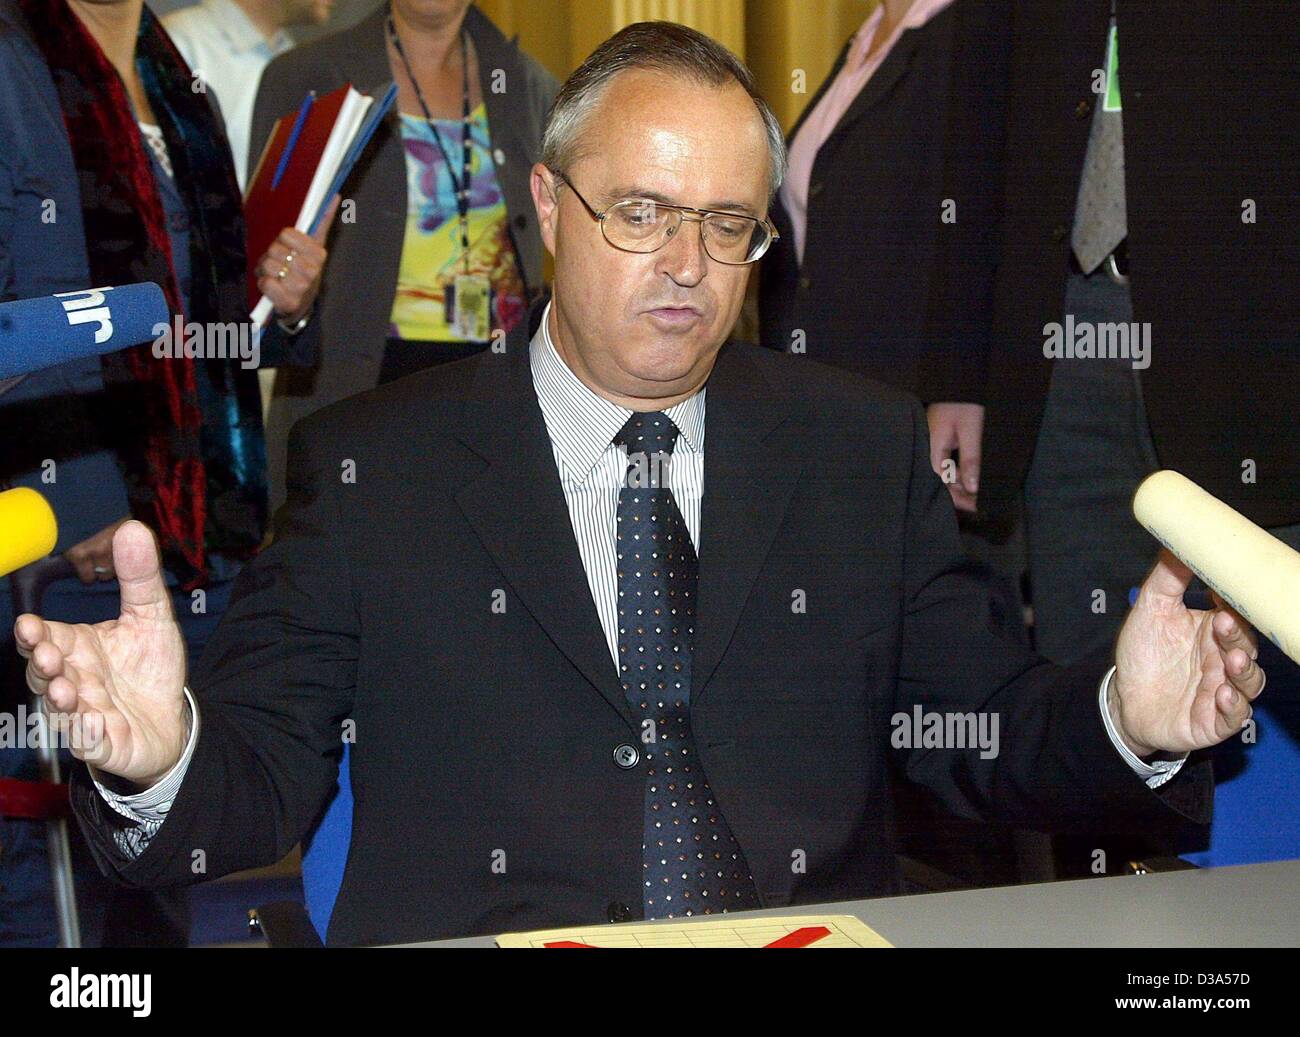 (dpa) - The German Finance Minister Hans Eichel (SPD) spreads his arms while speaking as witness at the board of inquiry investigating the so called Leuna affair, Berlin, 18 April 2002. Stock Photo